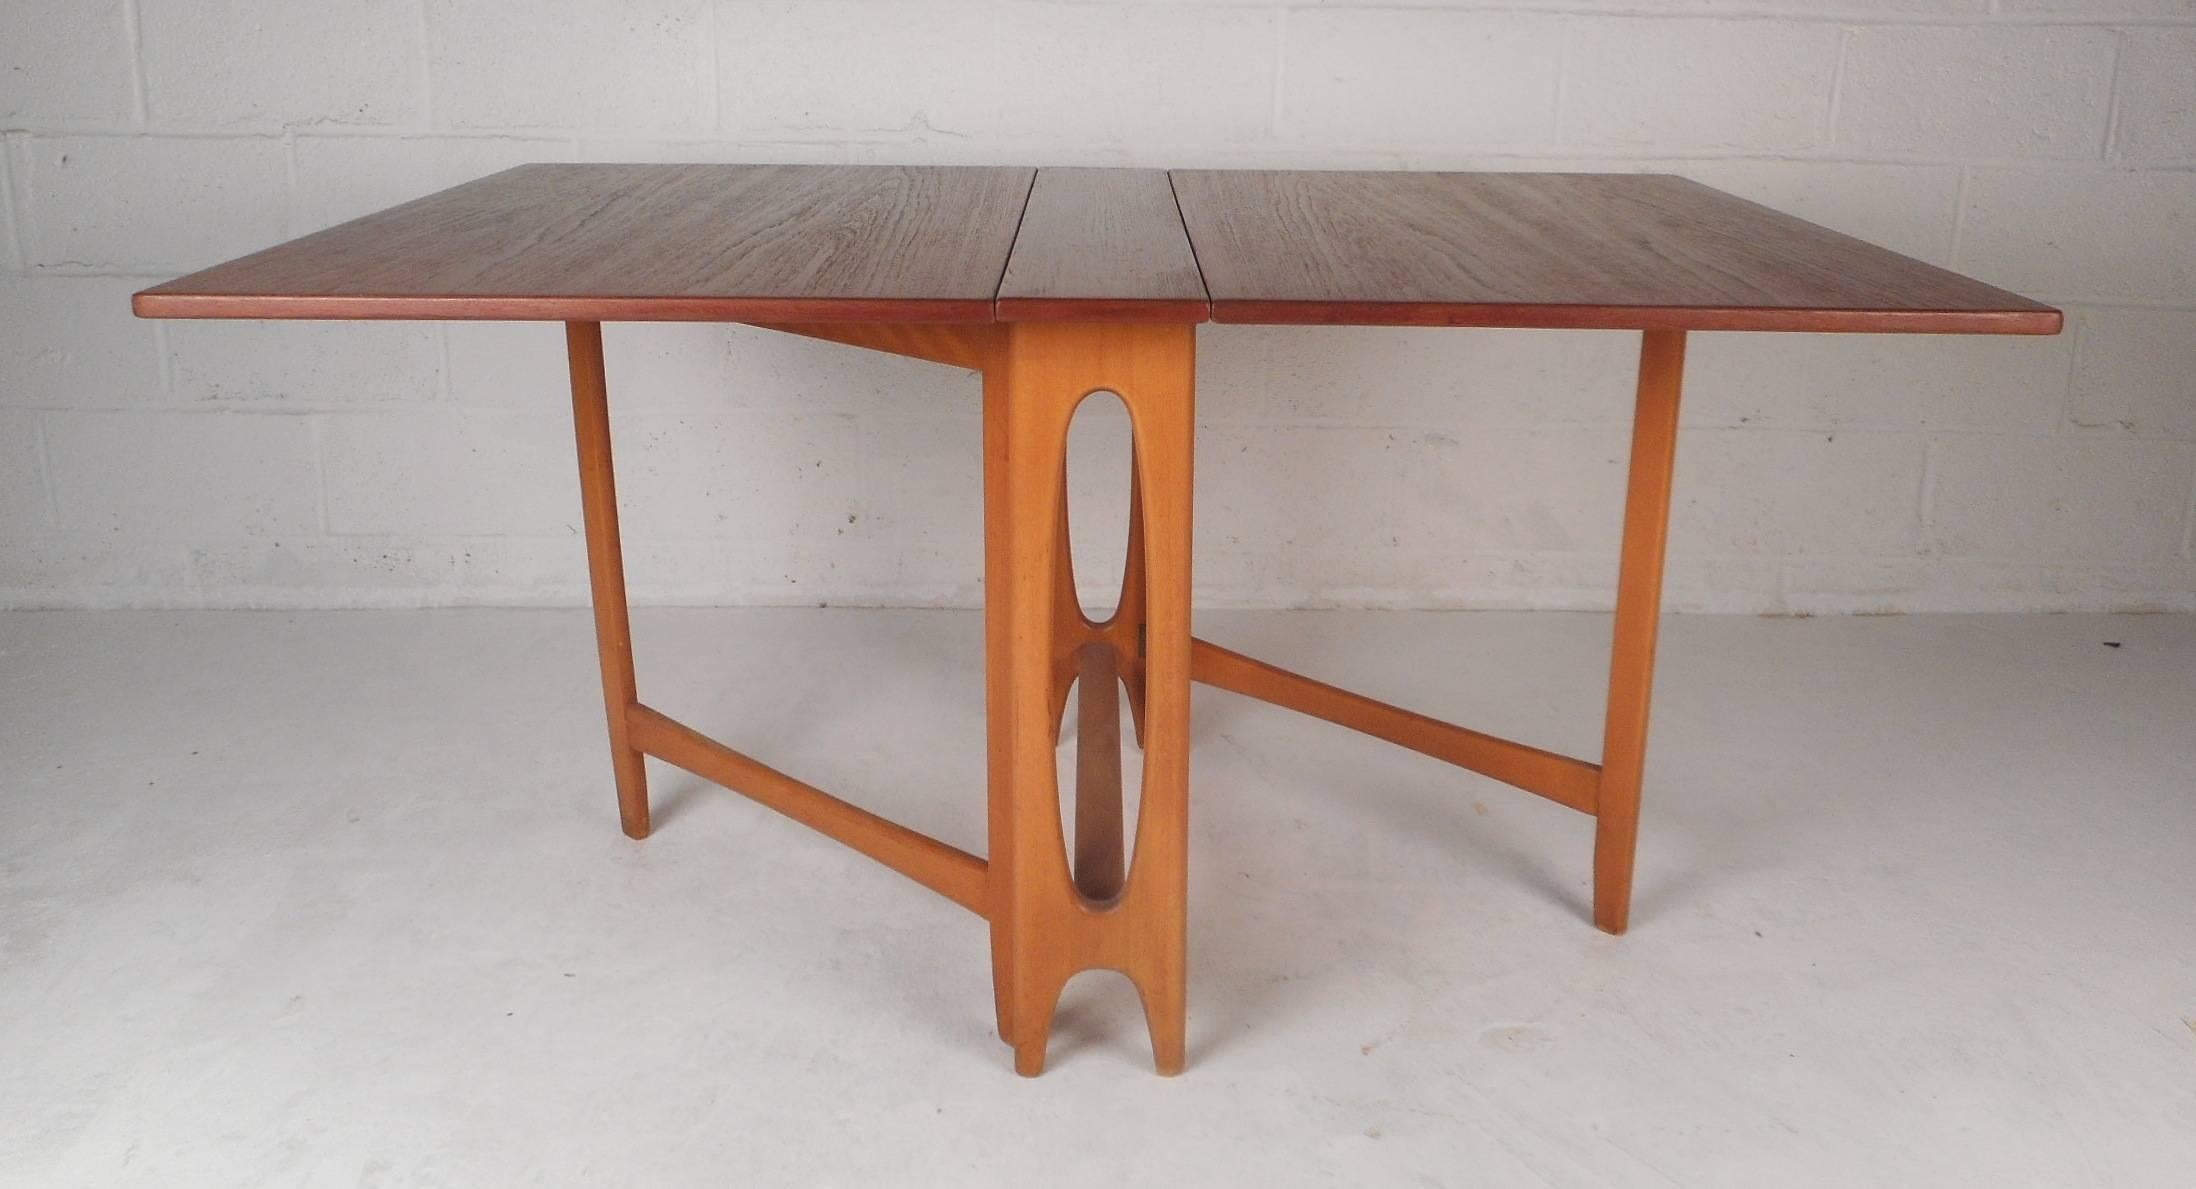 This beautiful vintage modern drop leaf dining table opens up to 56.75 inches wide. Unique design has gate legs that easily slide out ensuring sturdiness and style. This wonderful piece has a cut-out centre on the base and gorgeous wood grain